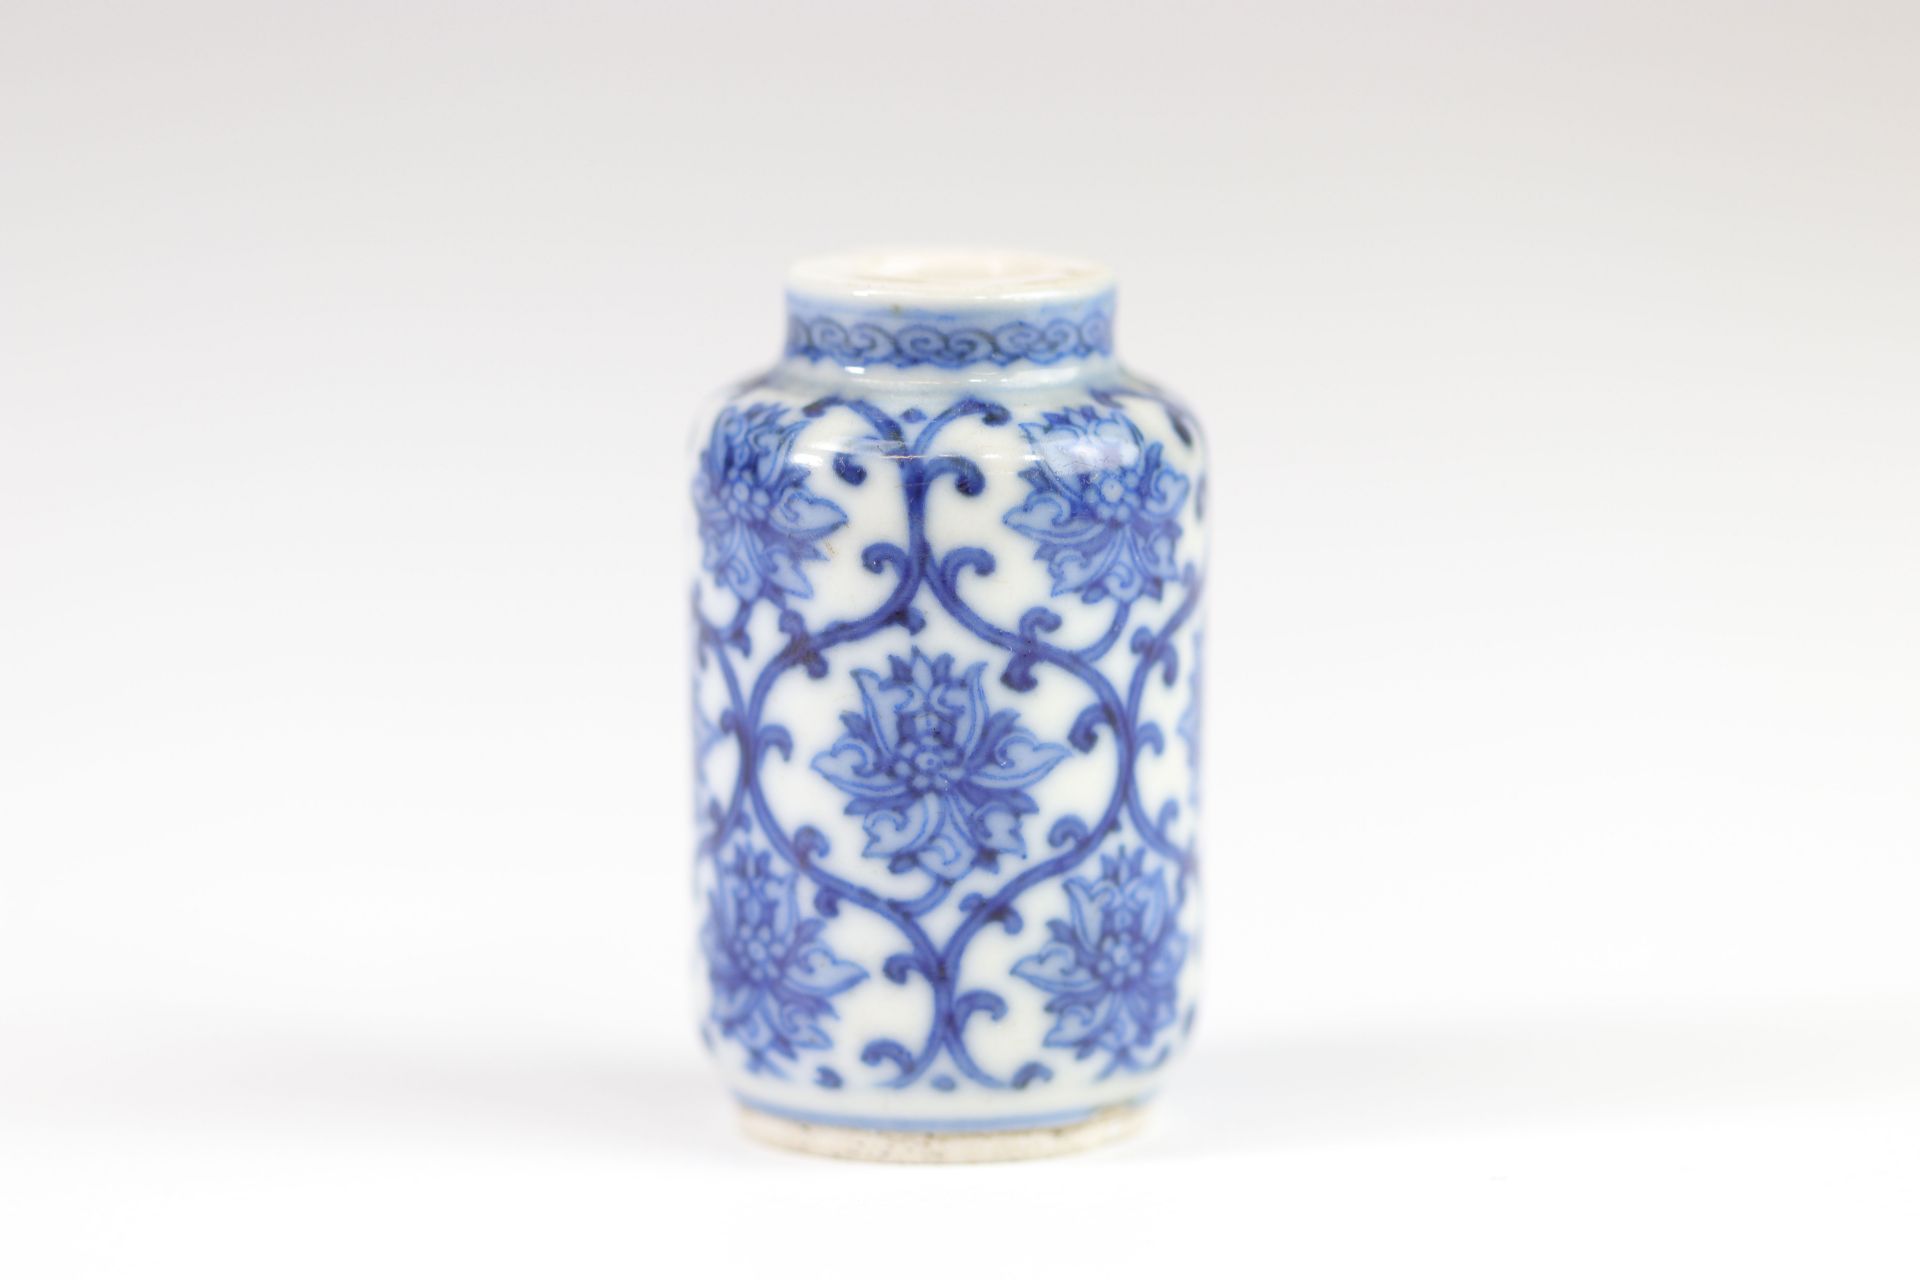 China blanc-bleu porcelain snuff box with floral decoration brand under the piece - Image 2 of 5